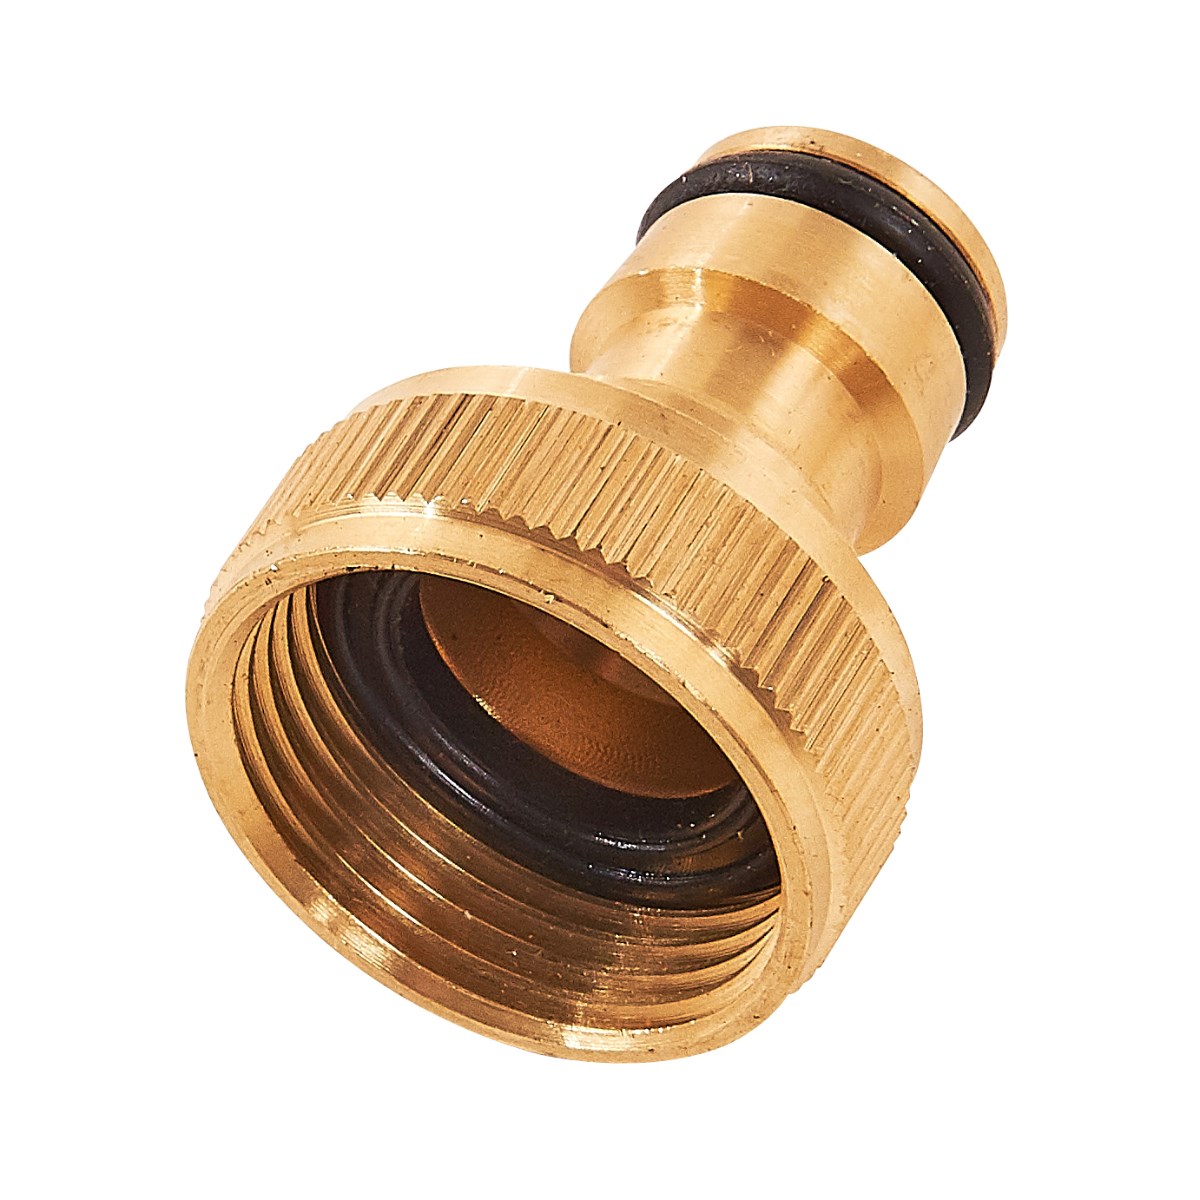 Am-Tech Tap Hose Connector Male Garden Pipe Fitting Jubilee Clip Nozzle Outdoor 